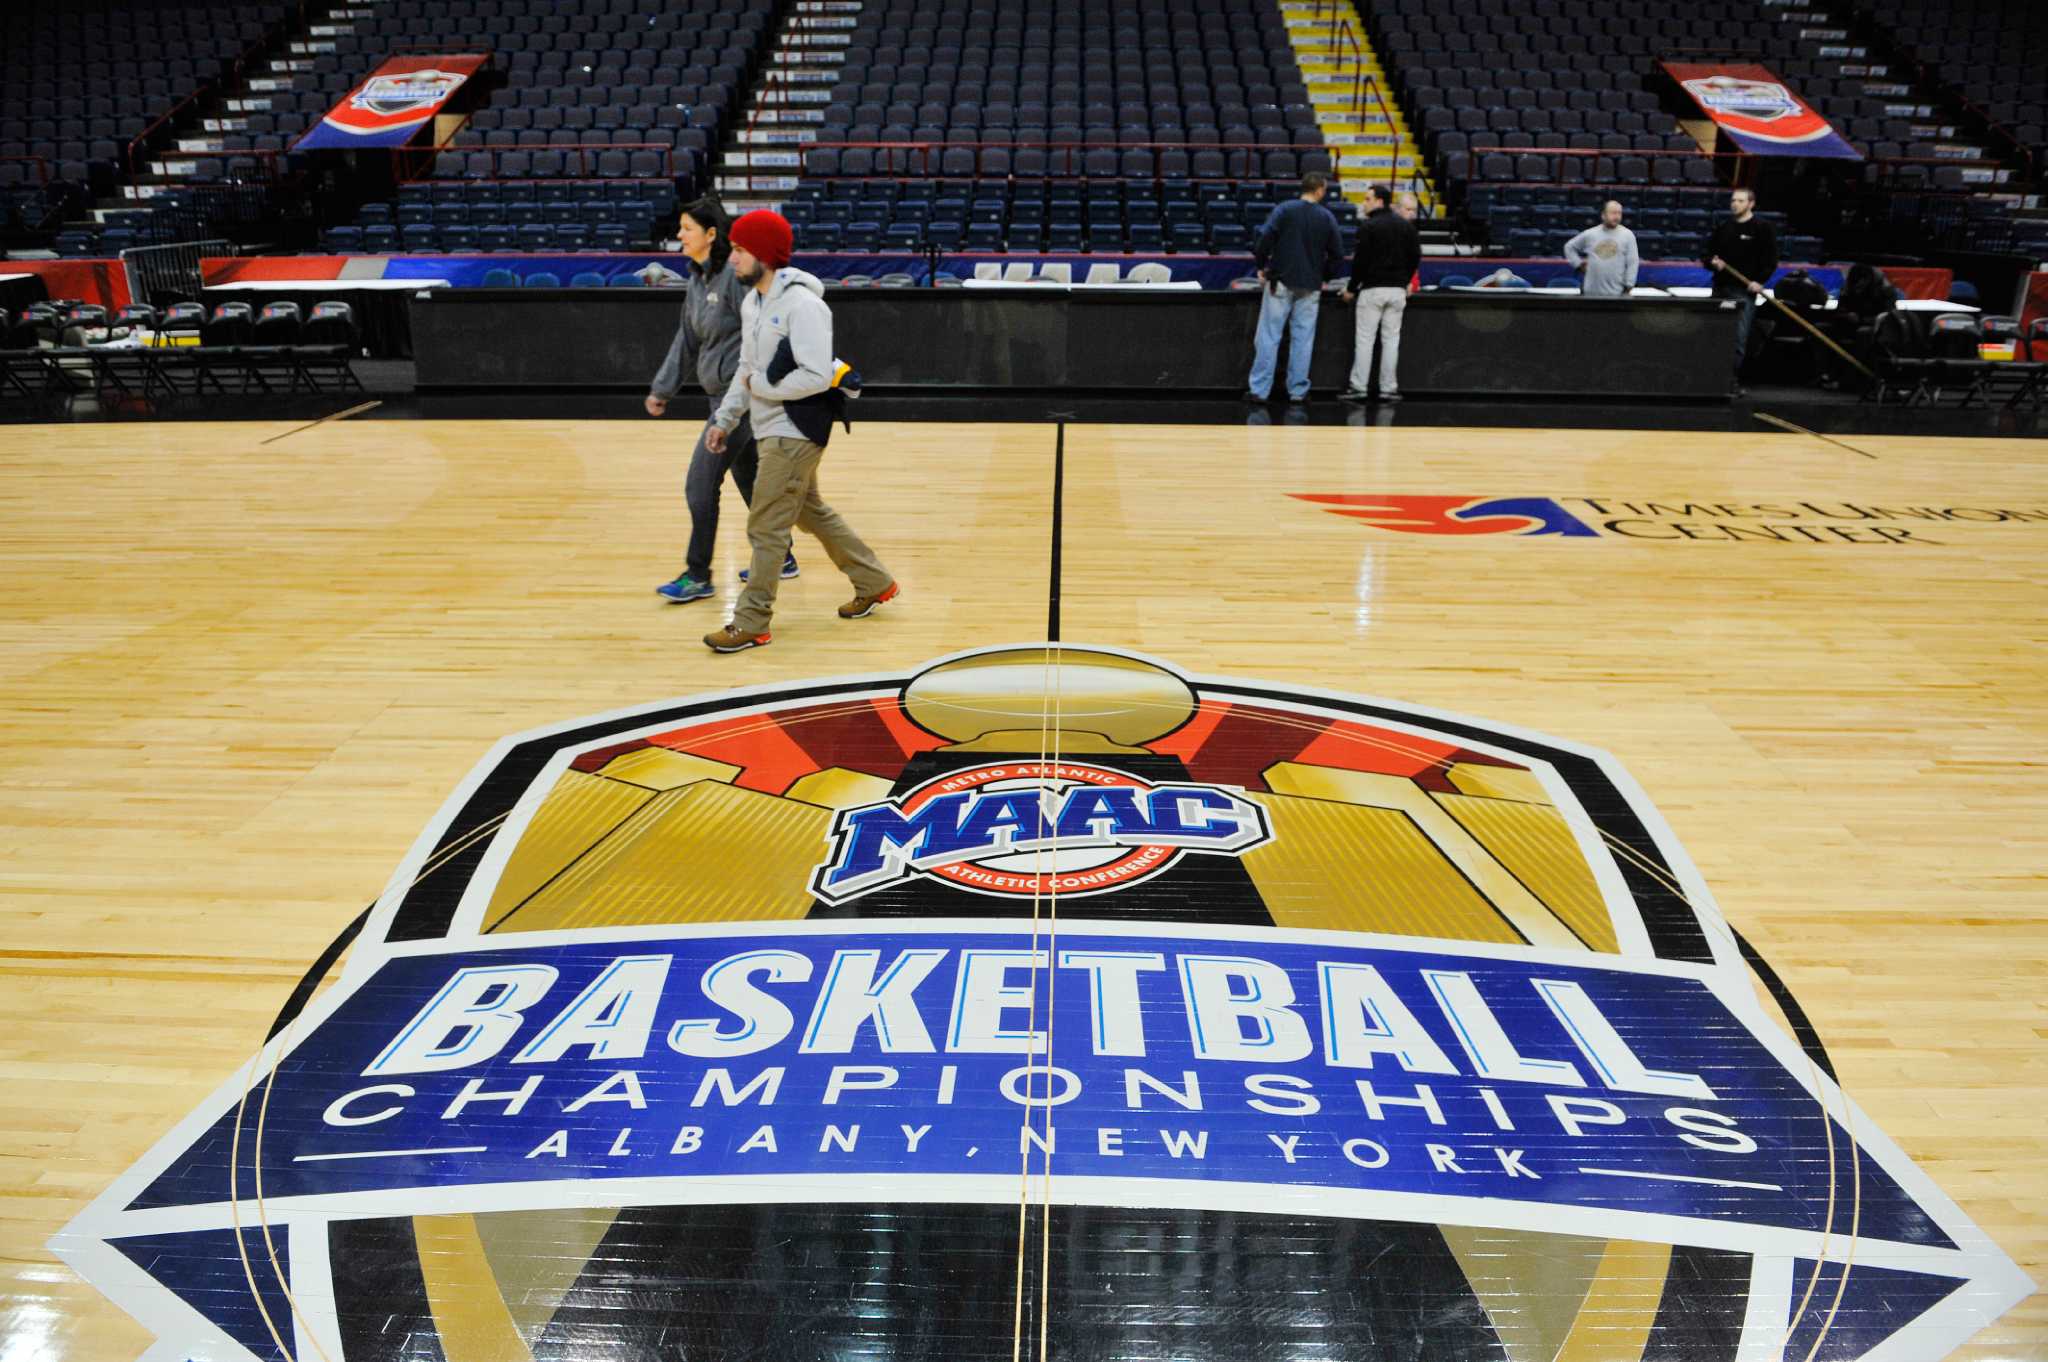 MAAC basketball tournament to stay in Albany through 2019